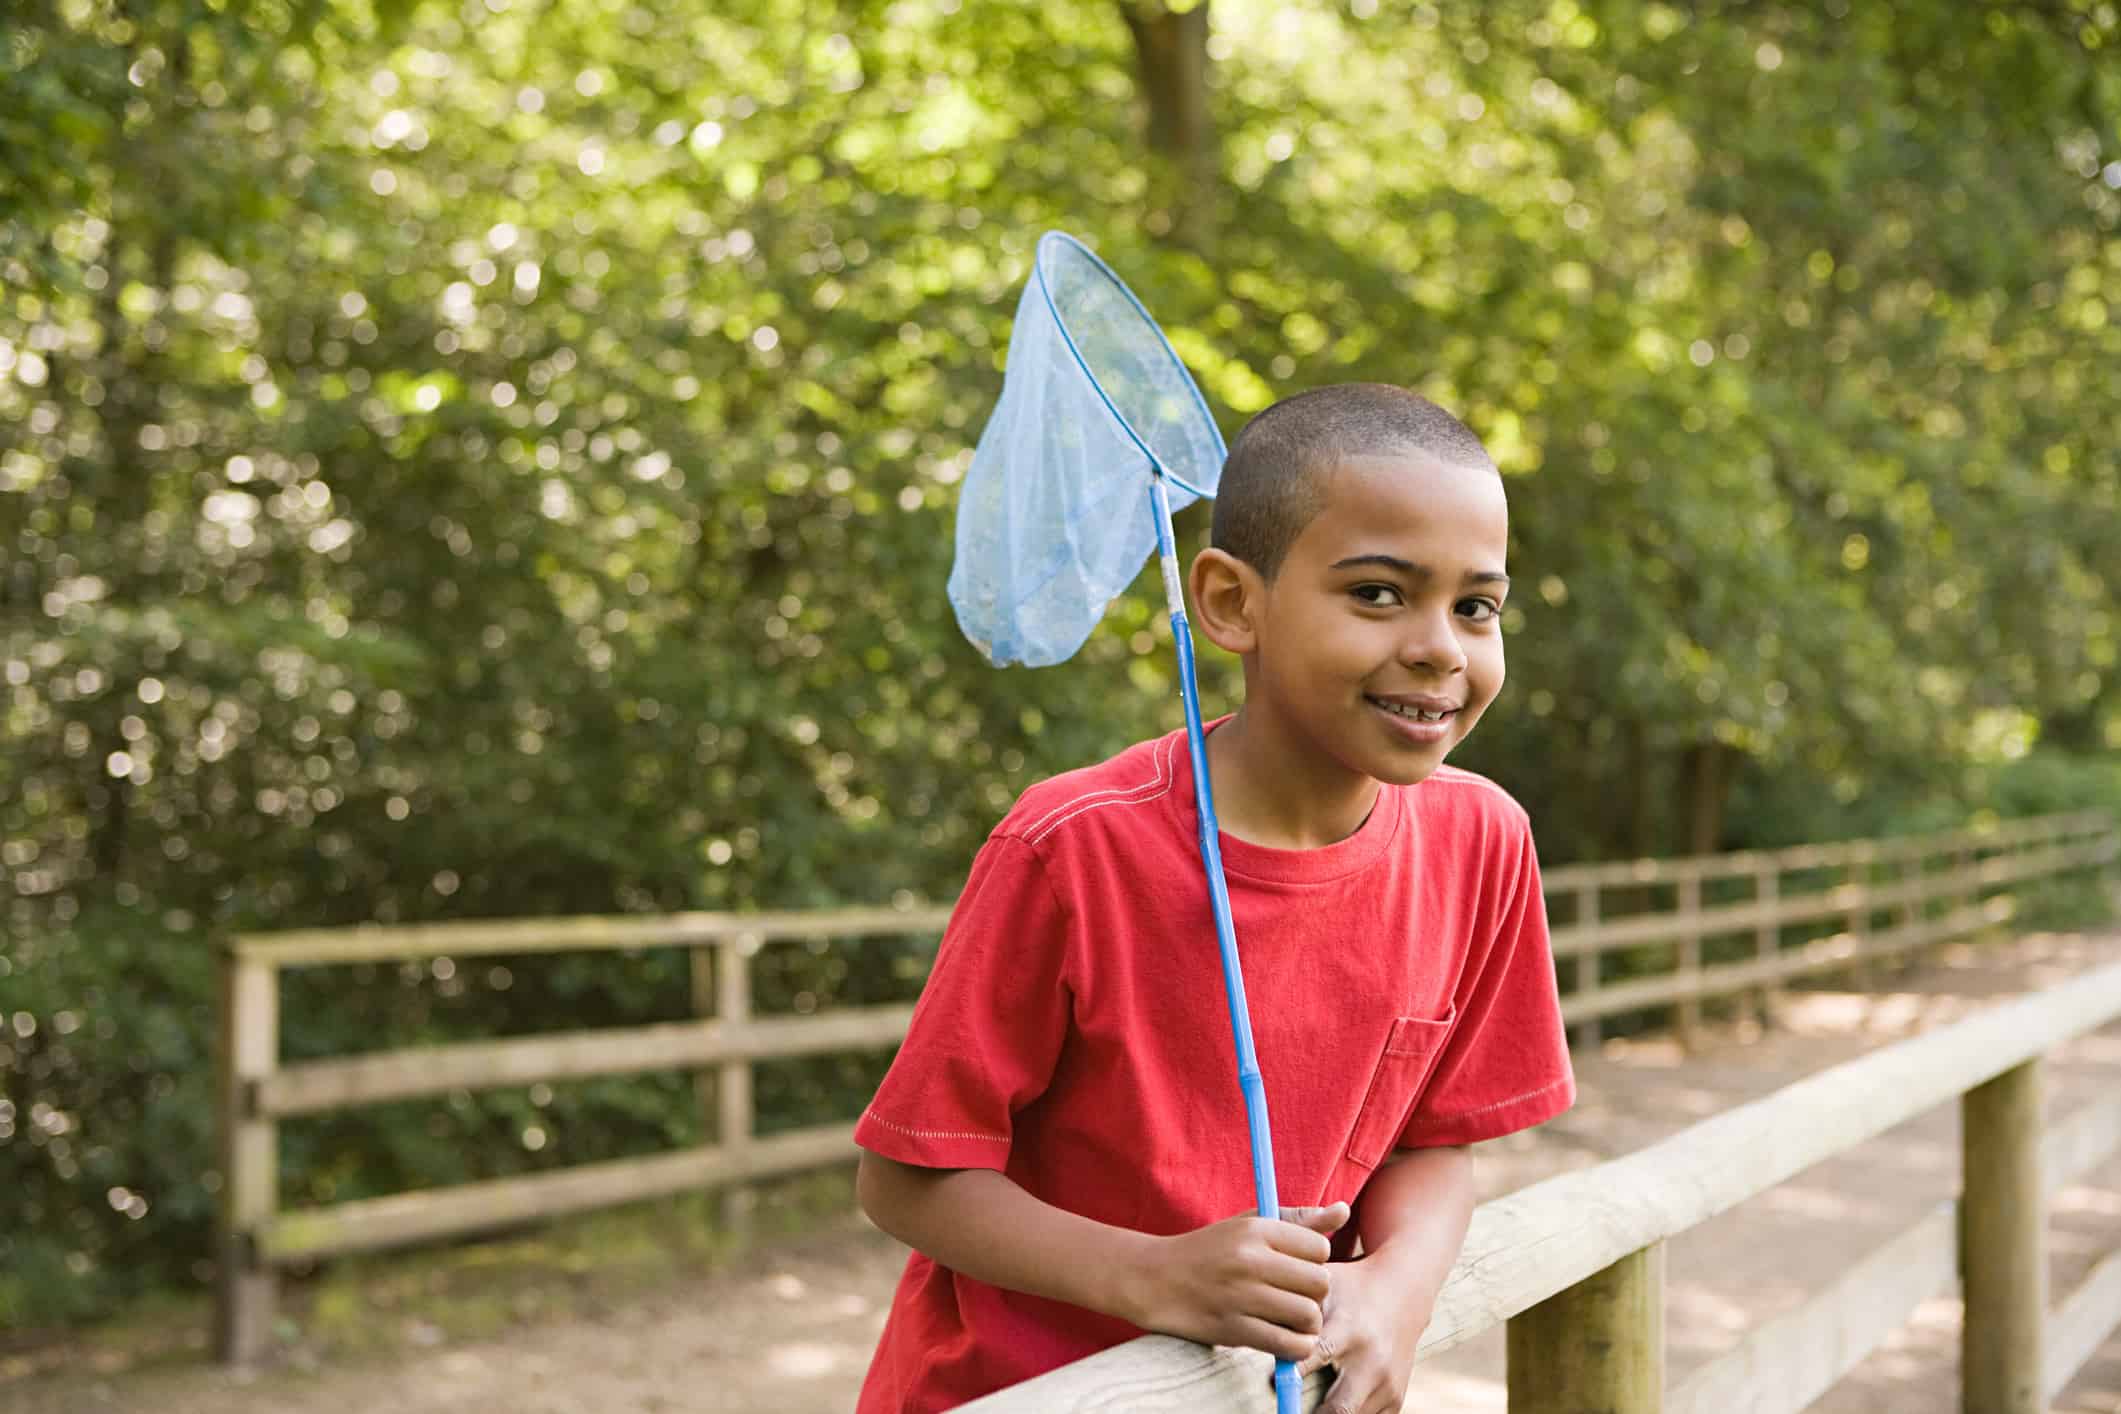 Young boy holding a butterfly net in a natural setting